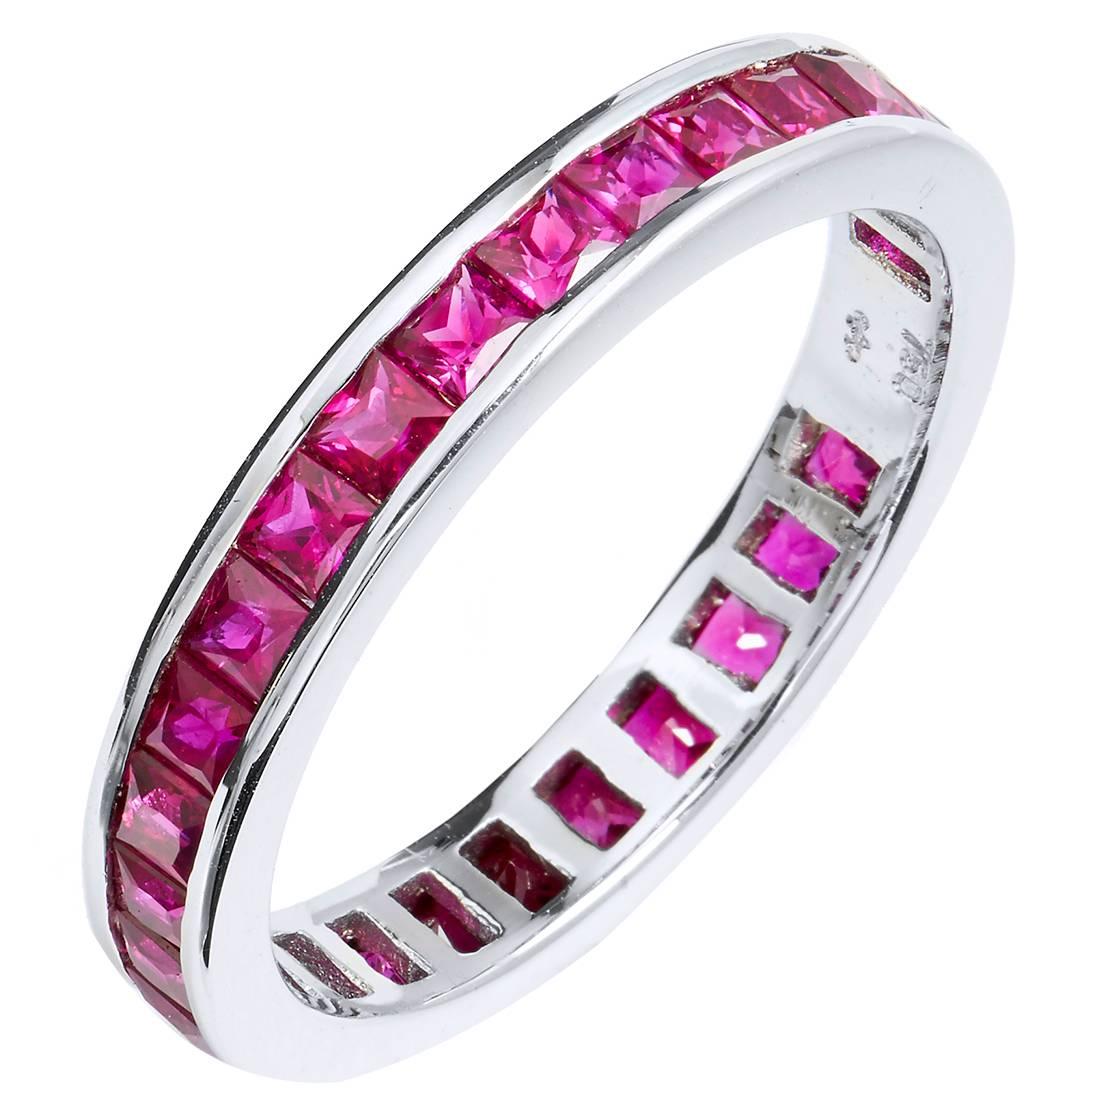 Handcrafted 1.76 Carat Ruby Eternity Band Ring in 18 Karat White Gold